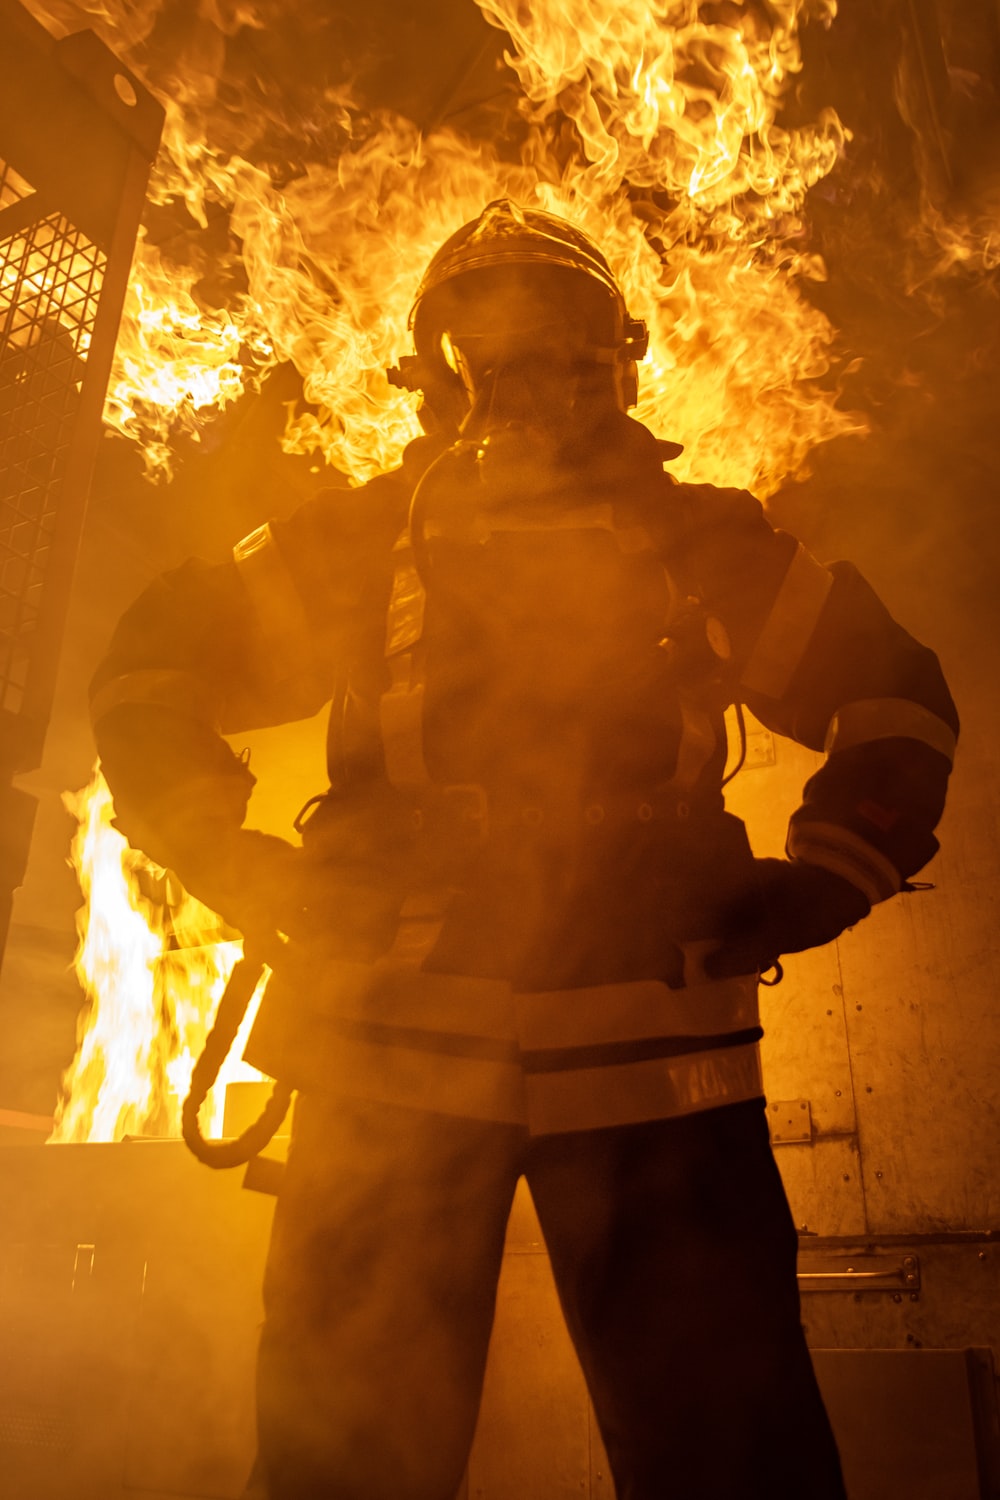 Firefighter Wallpapers